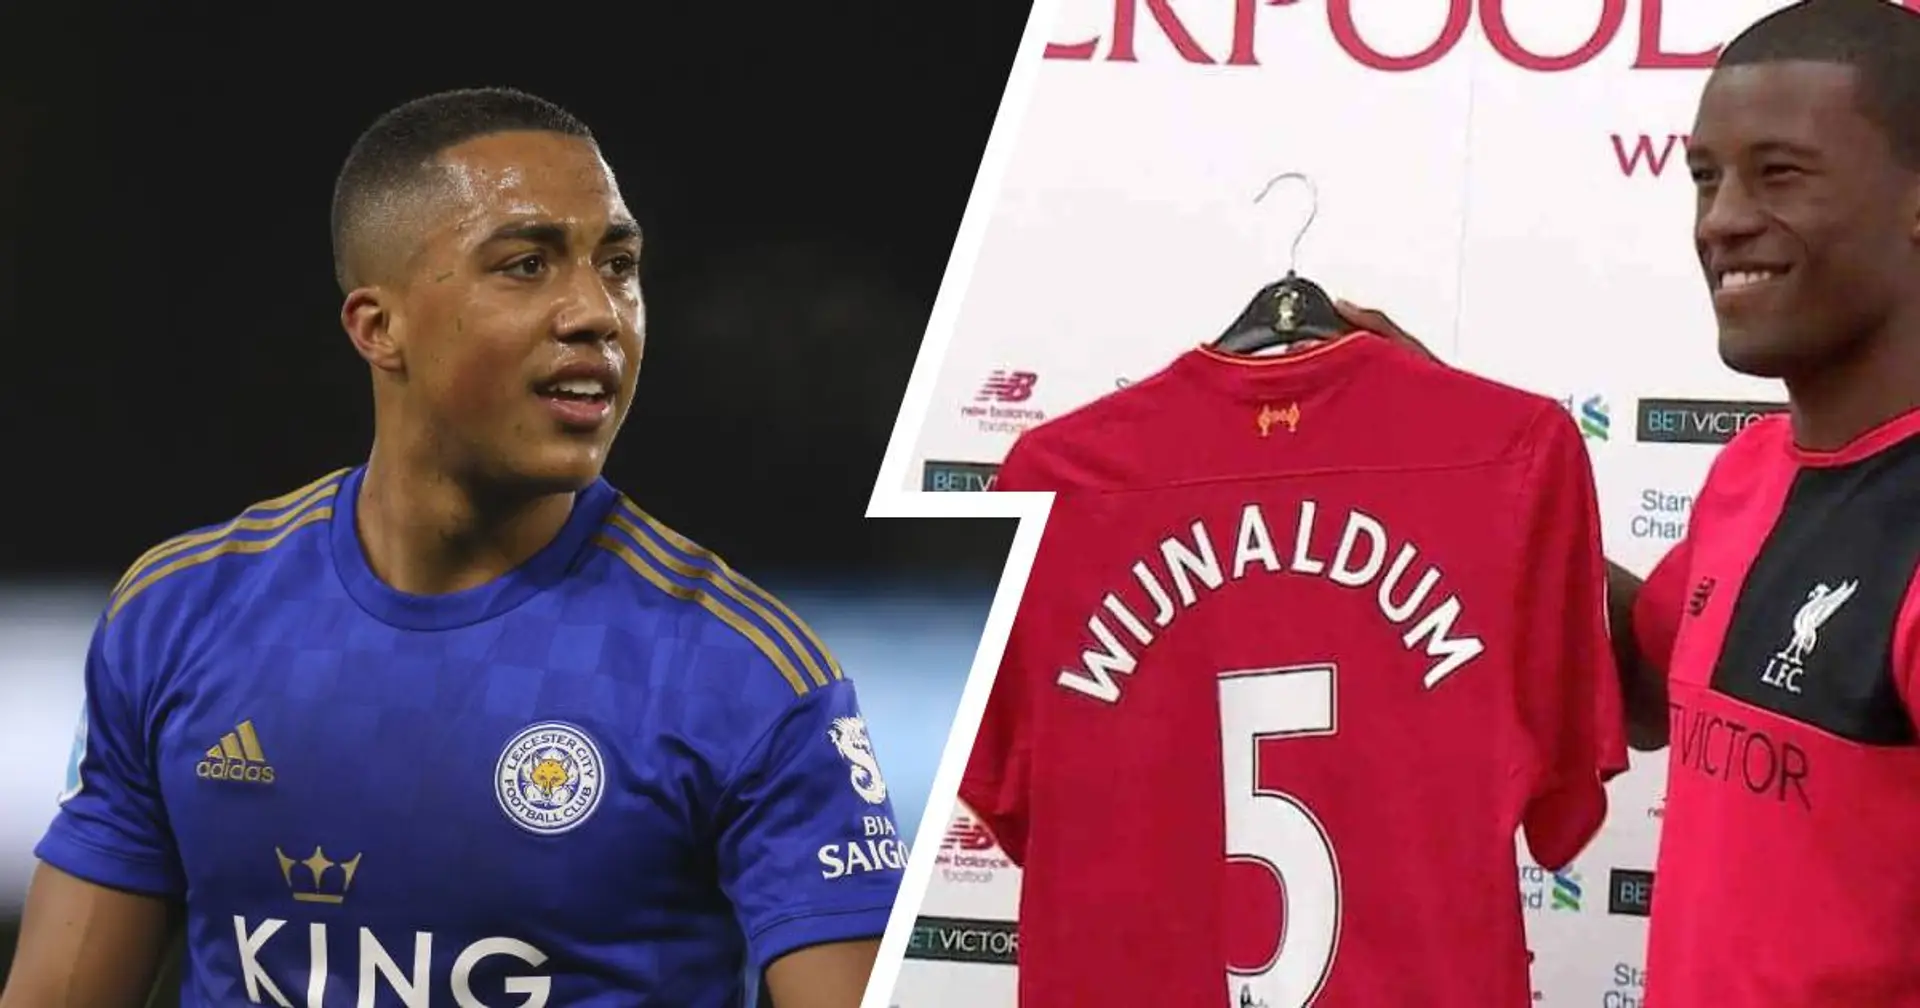 9 'attractive' squad numbers Liverpool could offer to potential newcomers